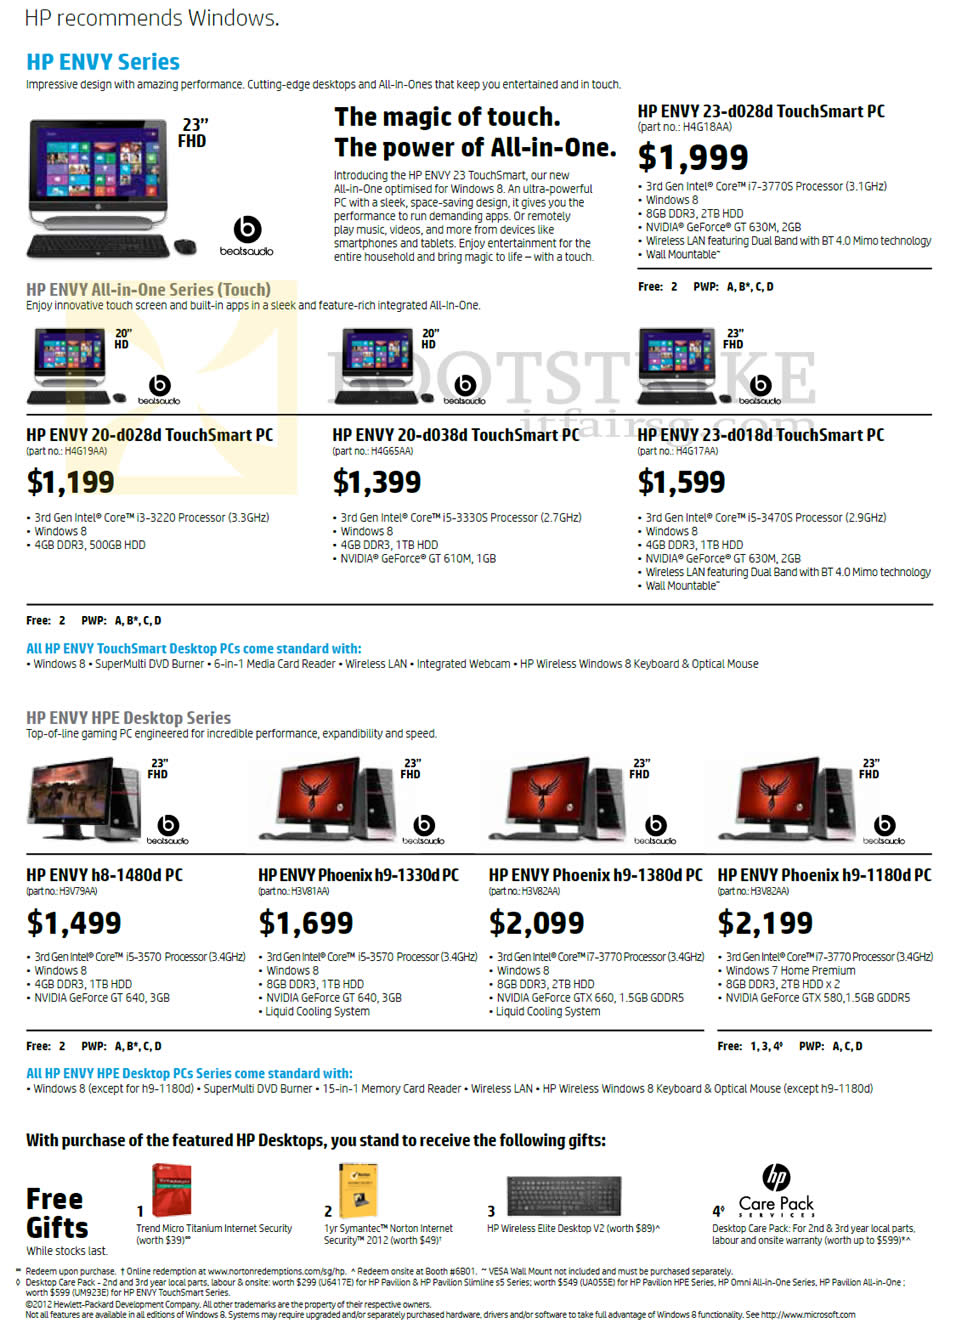 SITEX 2012 price list image brochure of HP AIO Desktop PCs Envy 20-d028d, 20-d038d, 23-d018d, Desktop PCs, H8-1480d, H9-1330d, H9-1380d, H9-1180d